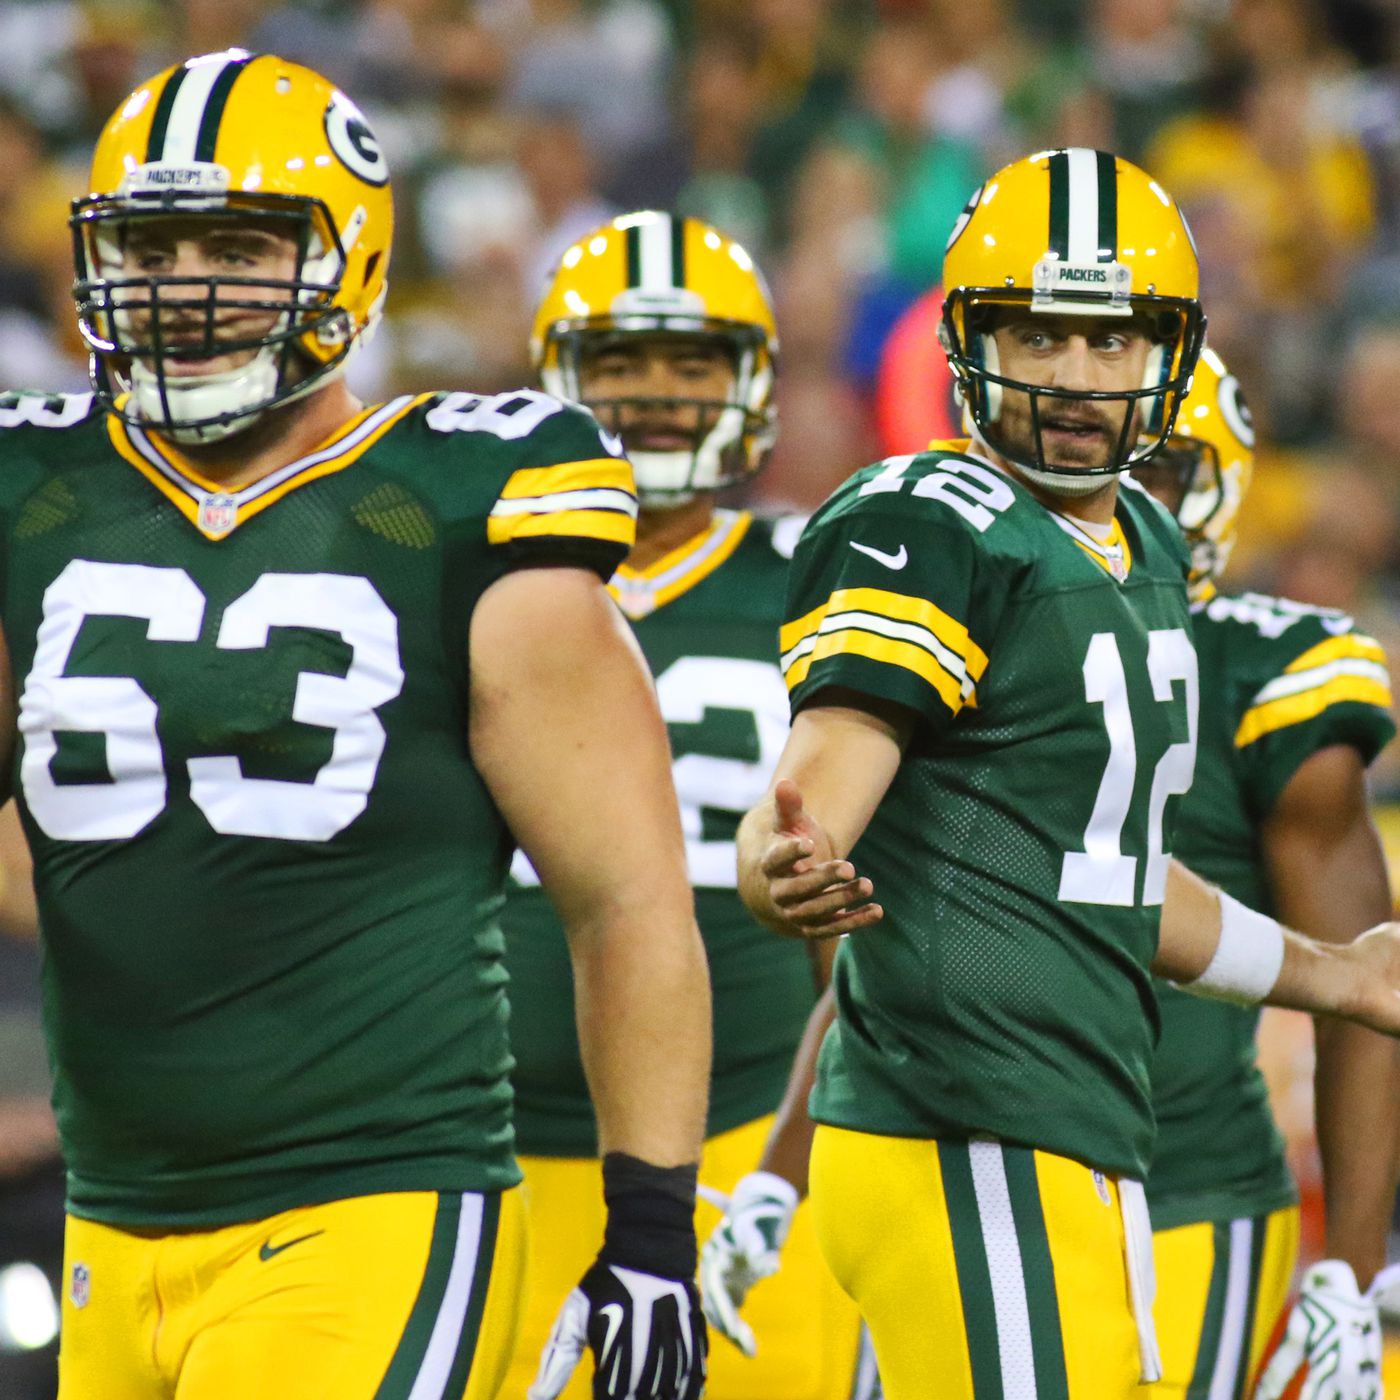 packers blog live